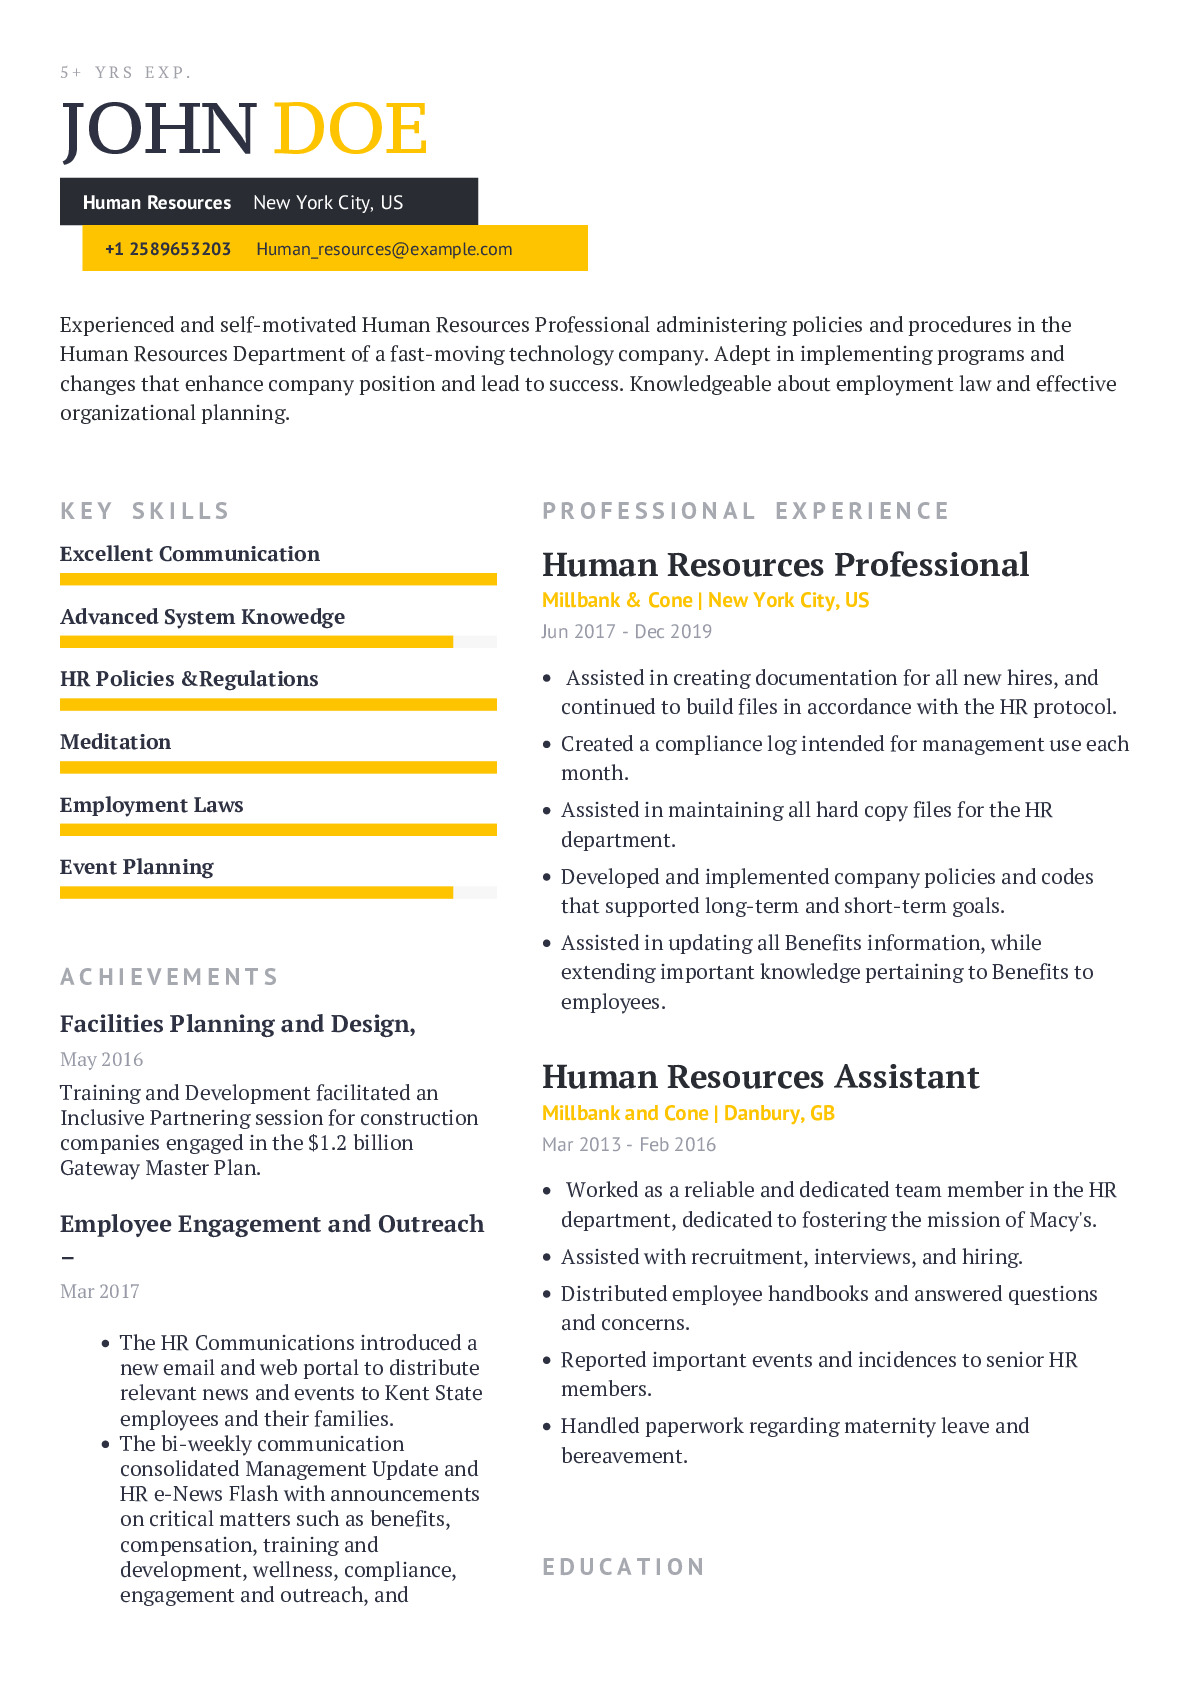 Human Resources Professional Resume Example With Content Sample CraftmyCV